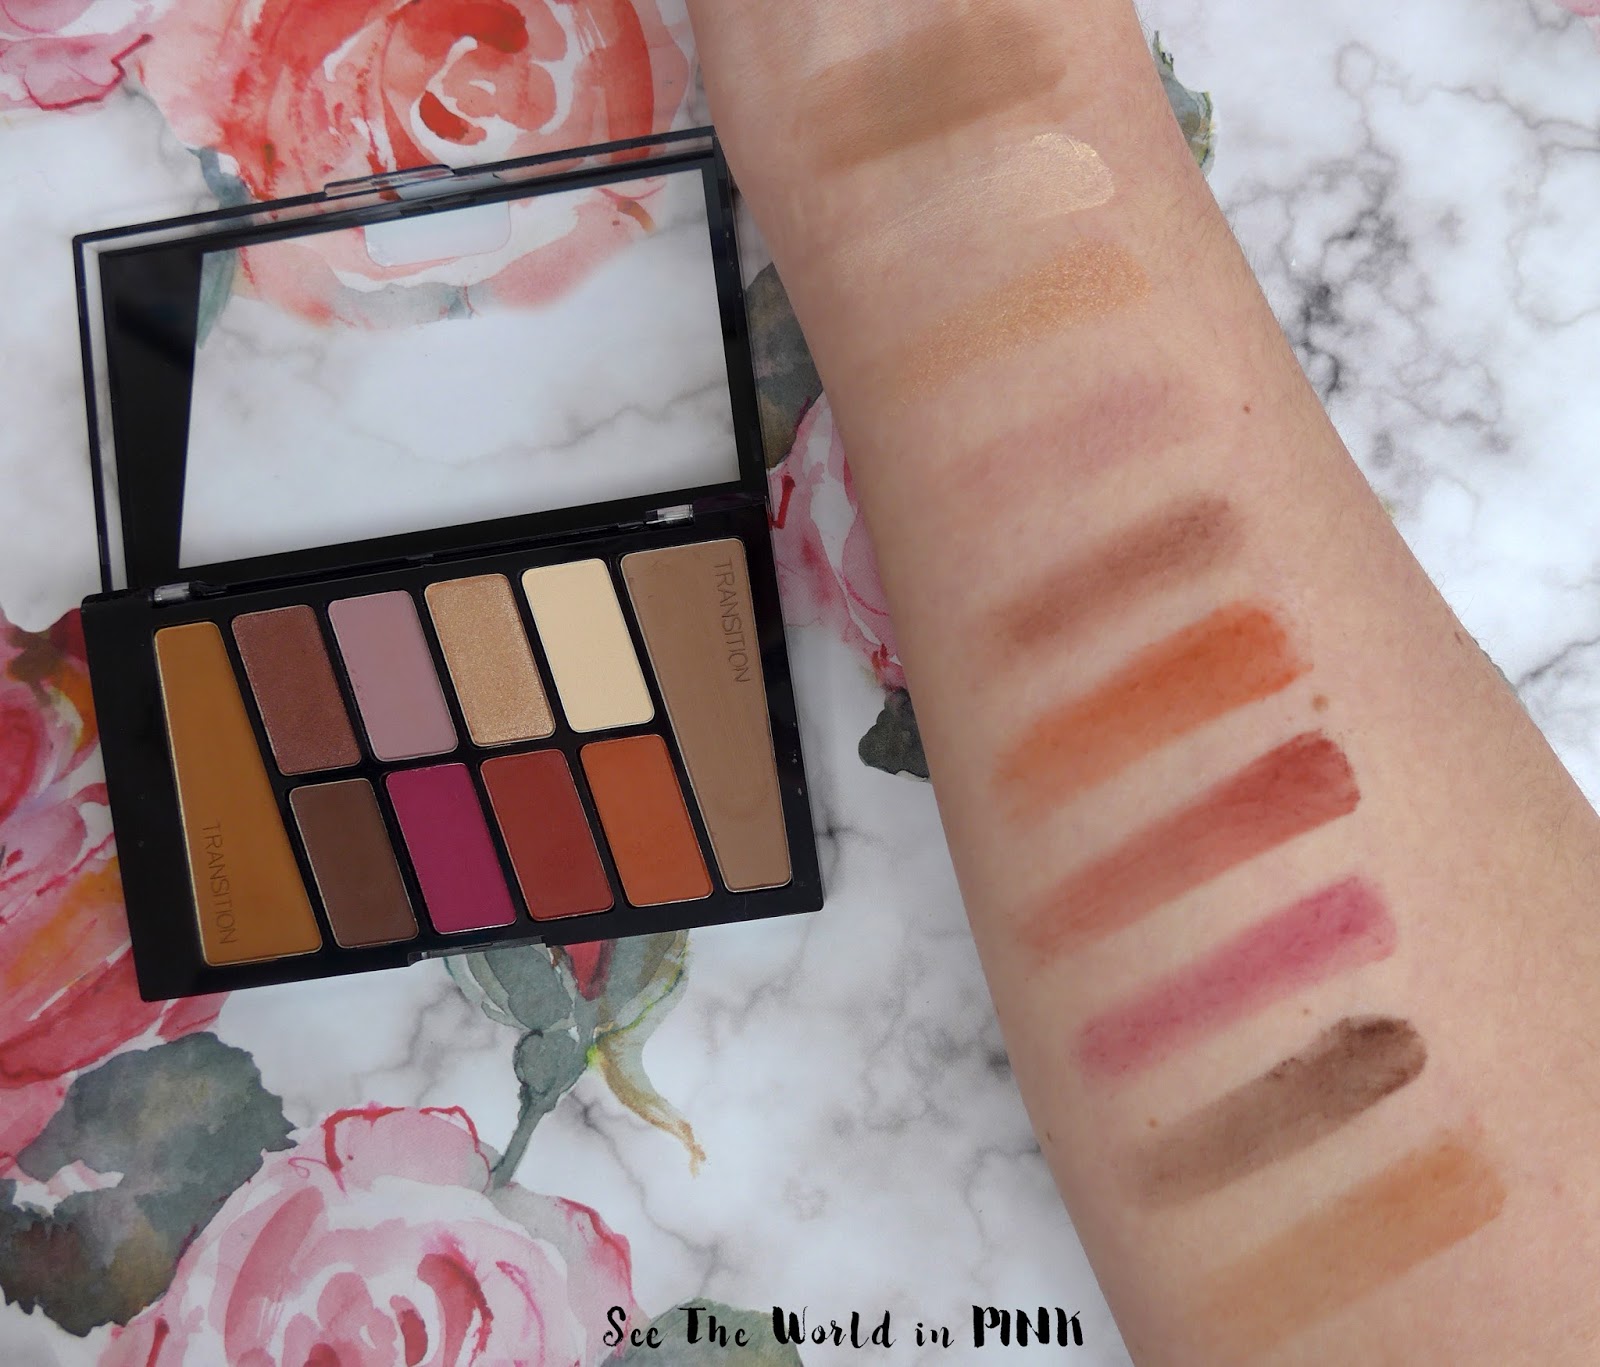 Wet n Wild Rose in the Air Color Icon Eyeshadow 10 Pan Palette - Swatches, Makeup Look and Review! 